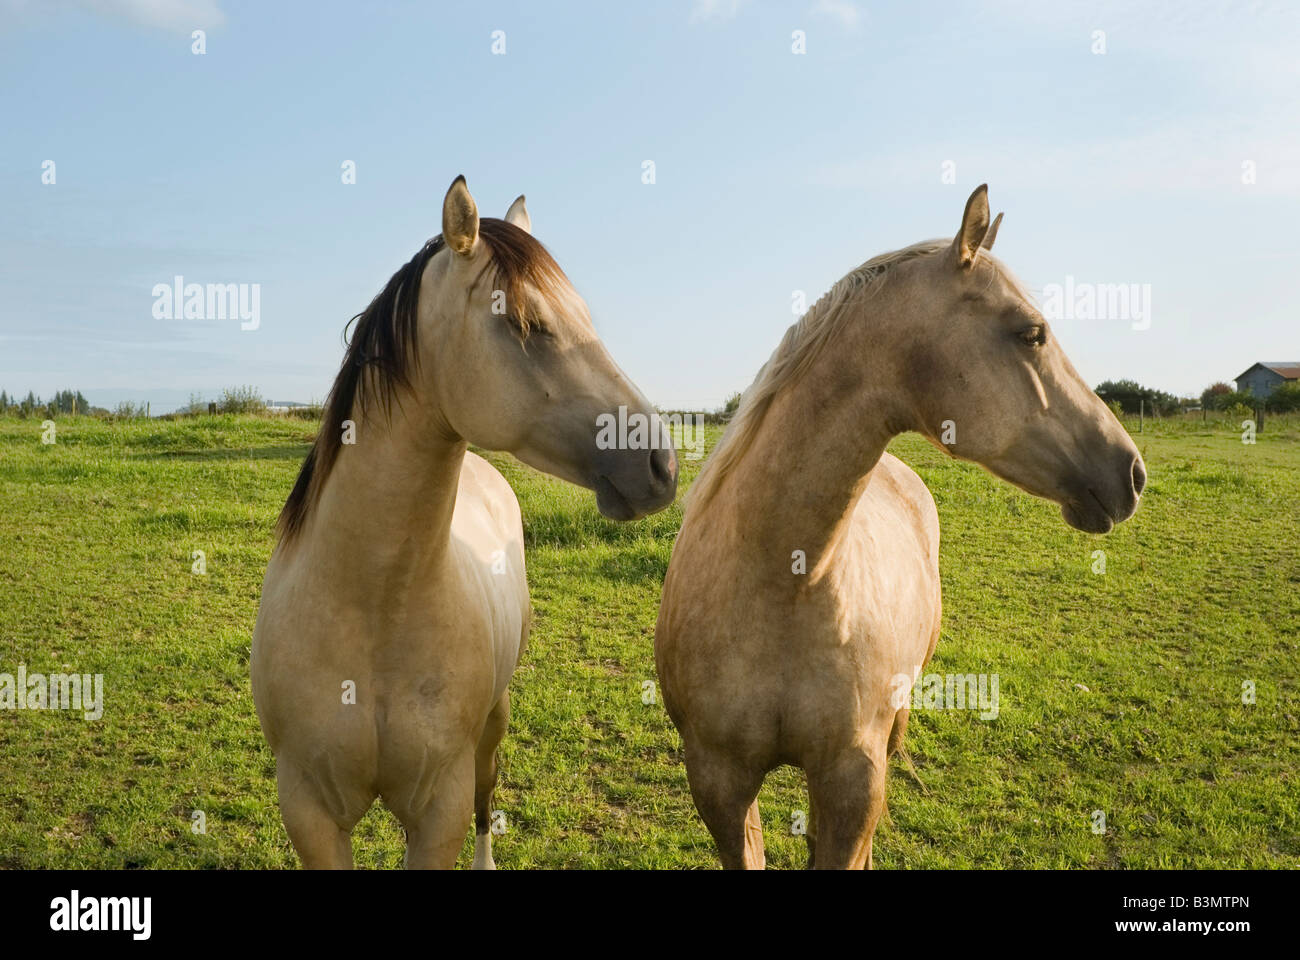 Two Quarter Horses turn their heads to the side in unison Stock Photo